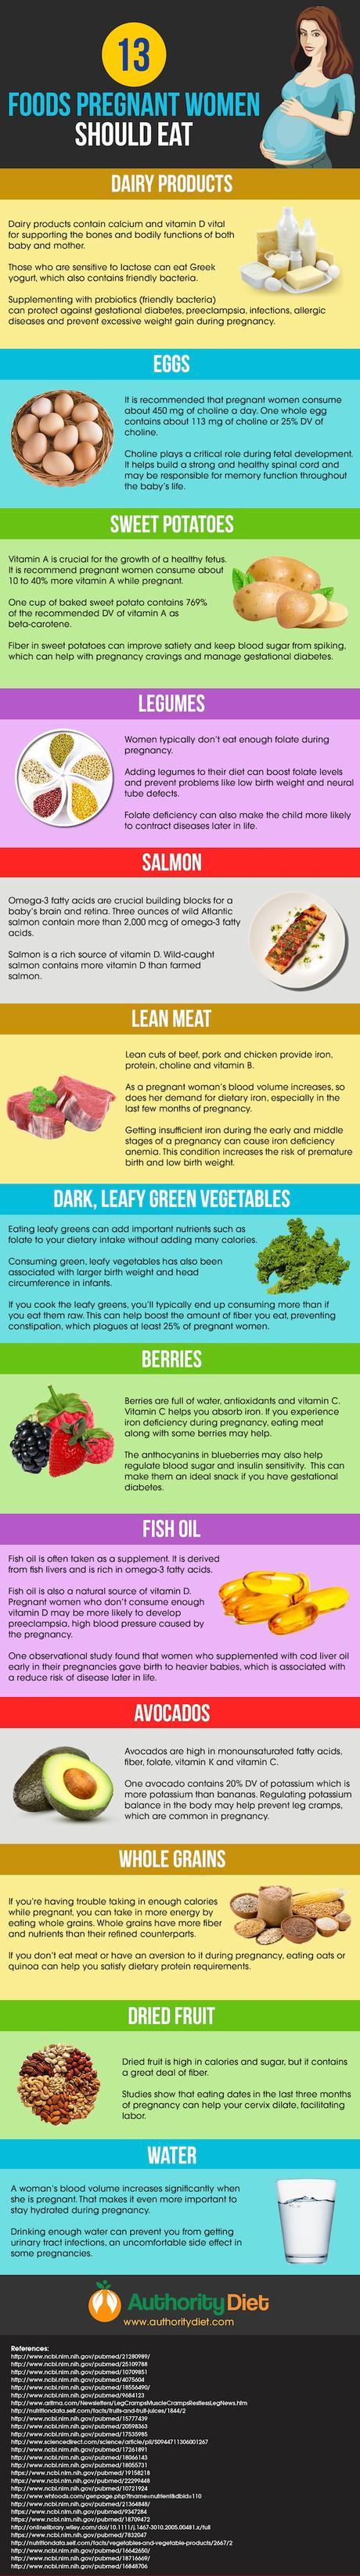 best foods for pregnant women infographic